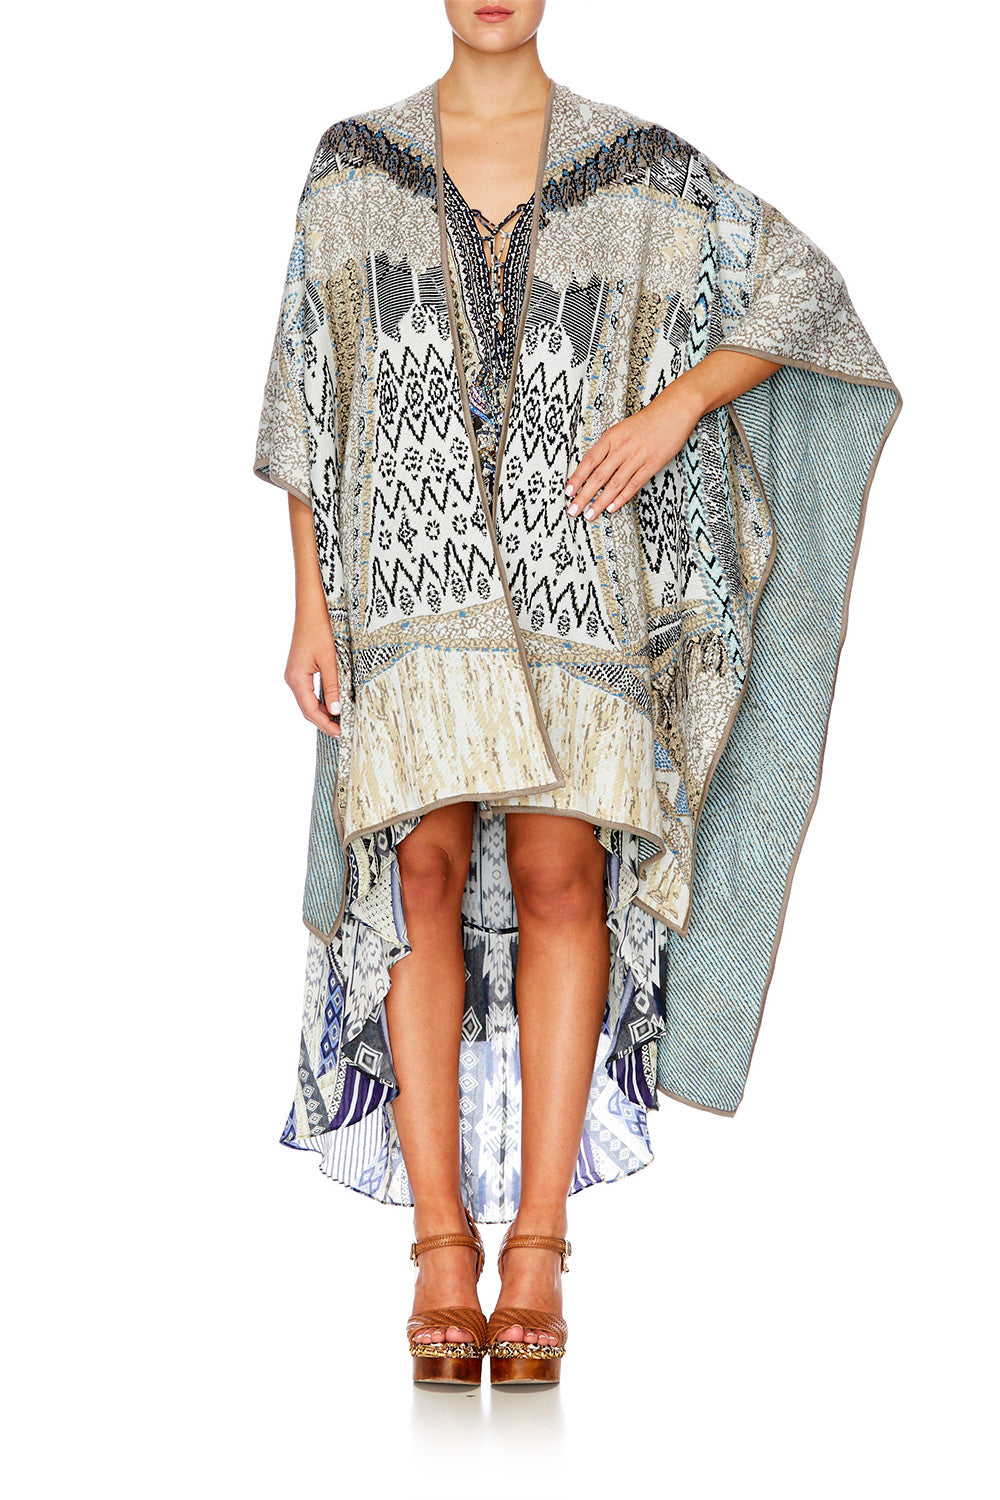 WEAVE ON OVERSIZED THROWOVER PONCHO